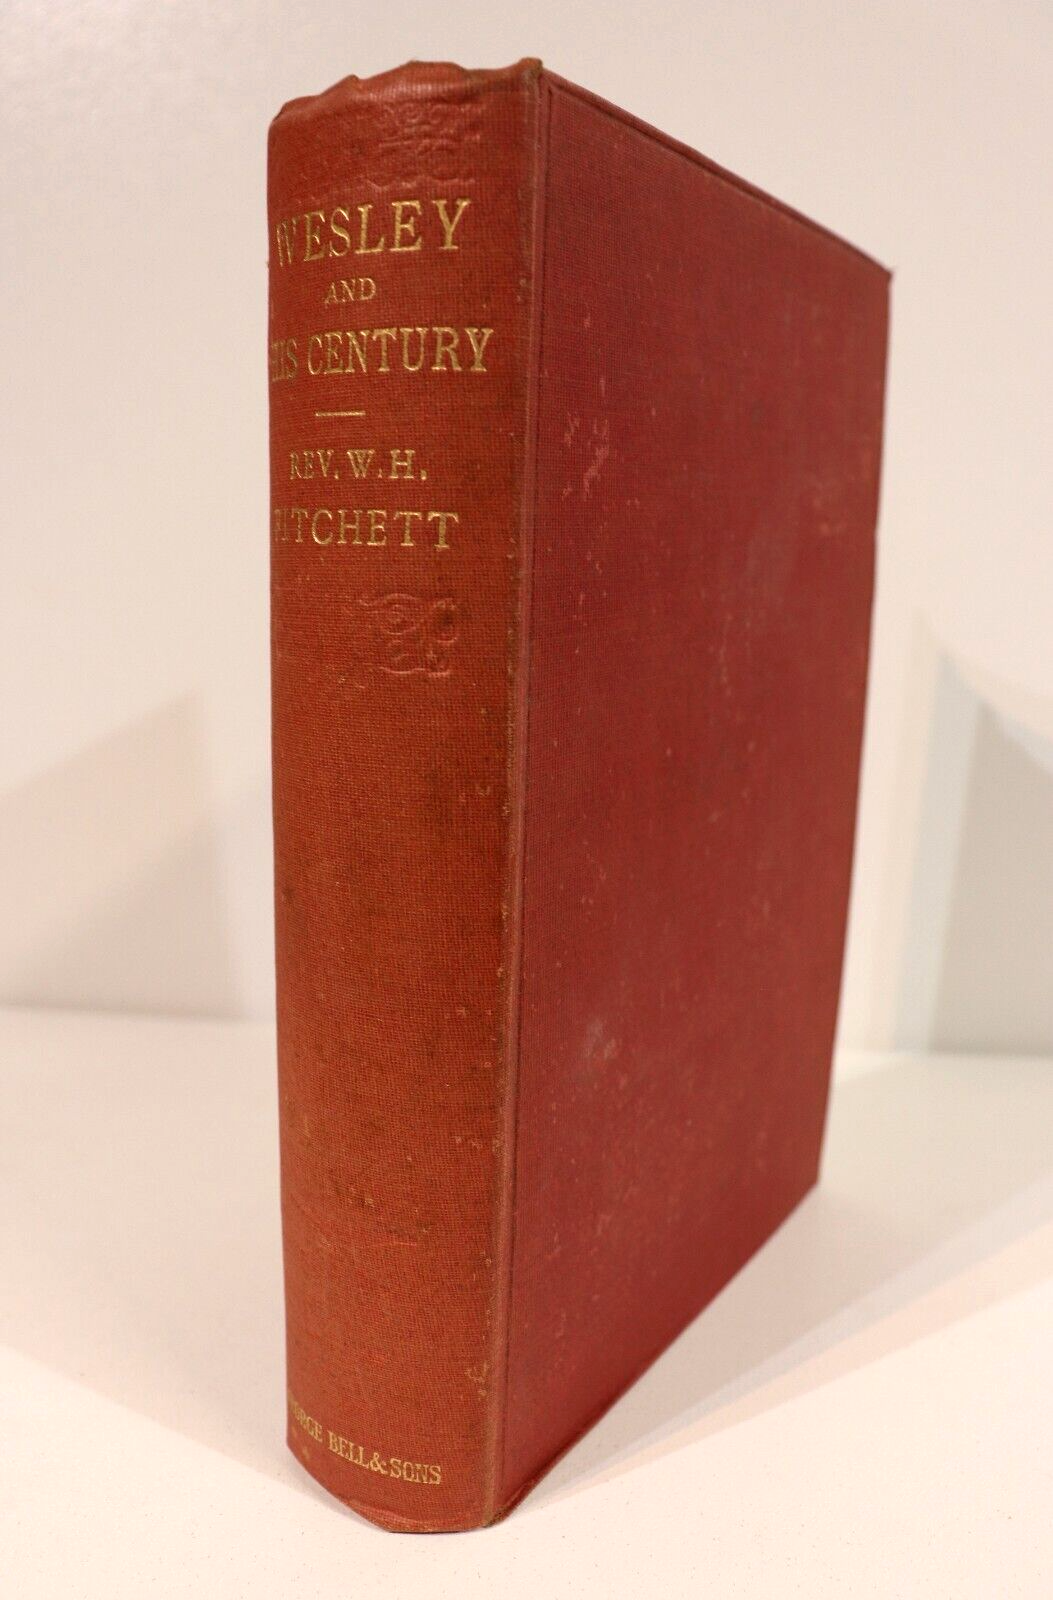 Wesley & His Century by Rev WH Fitchett - 1906 - Antique Theology Book